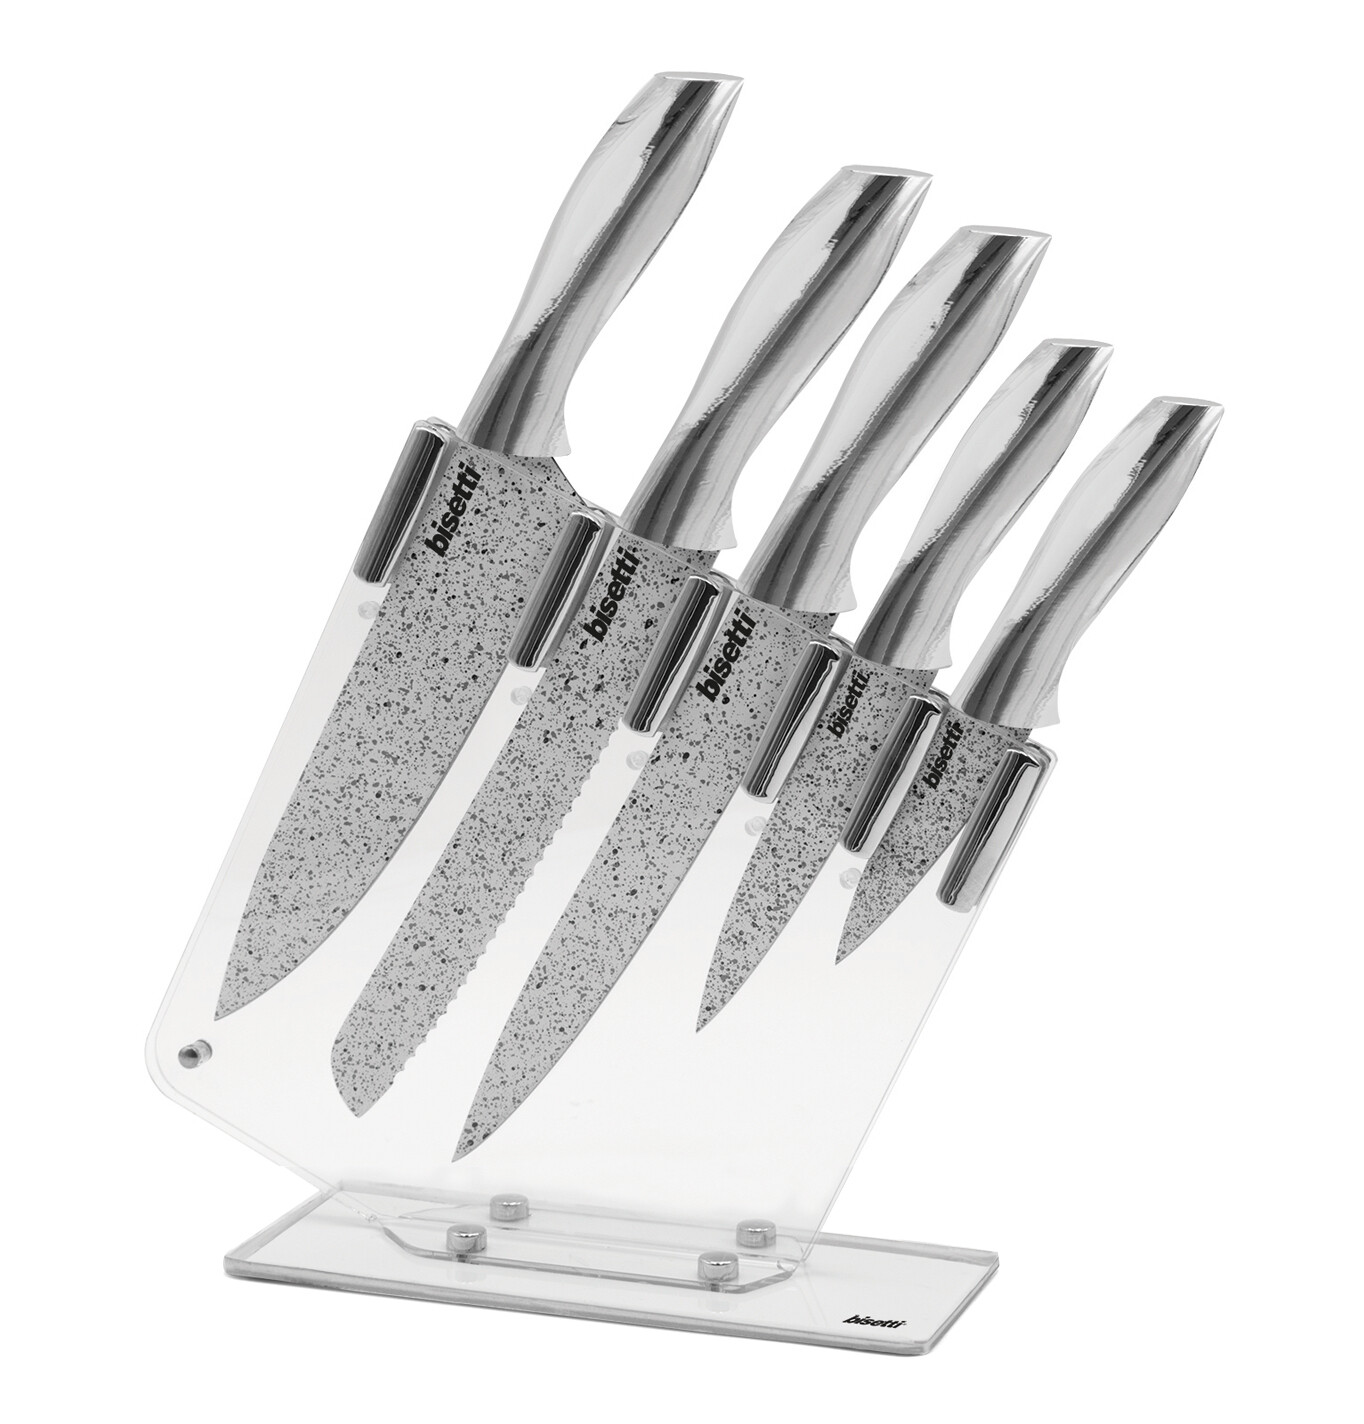 5 knives set 'Stonewhite' with silver colour handles and block